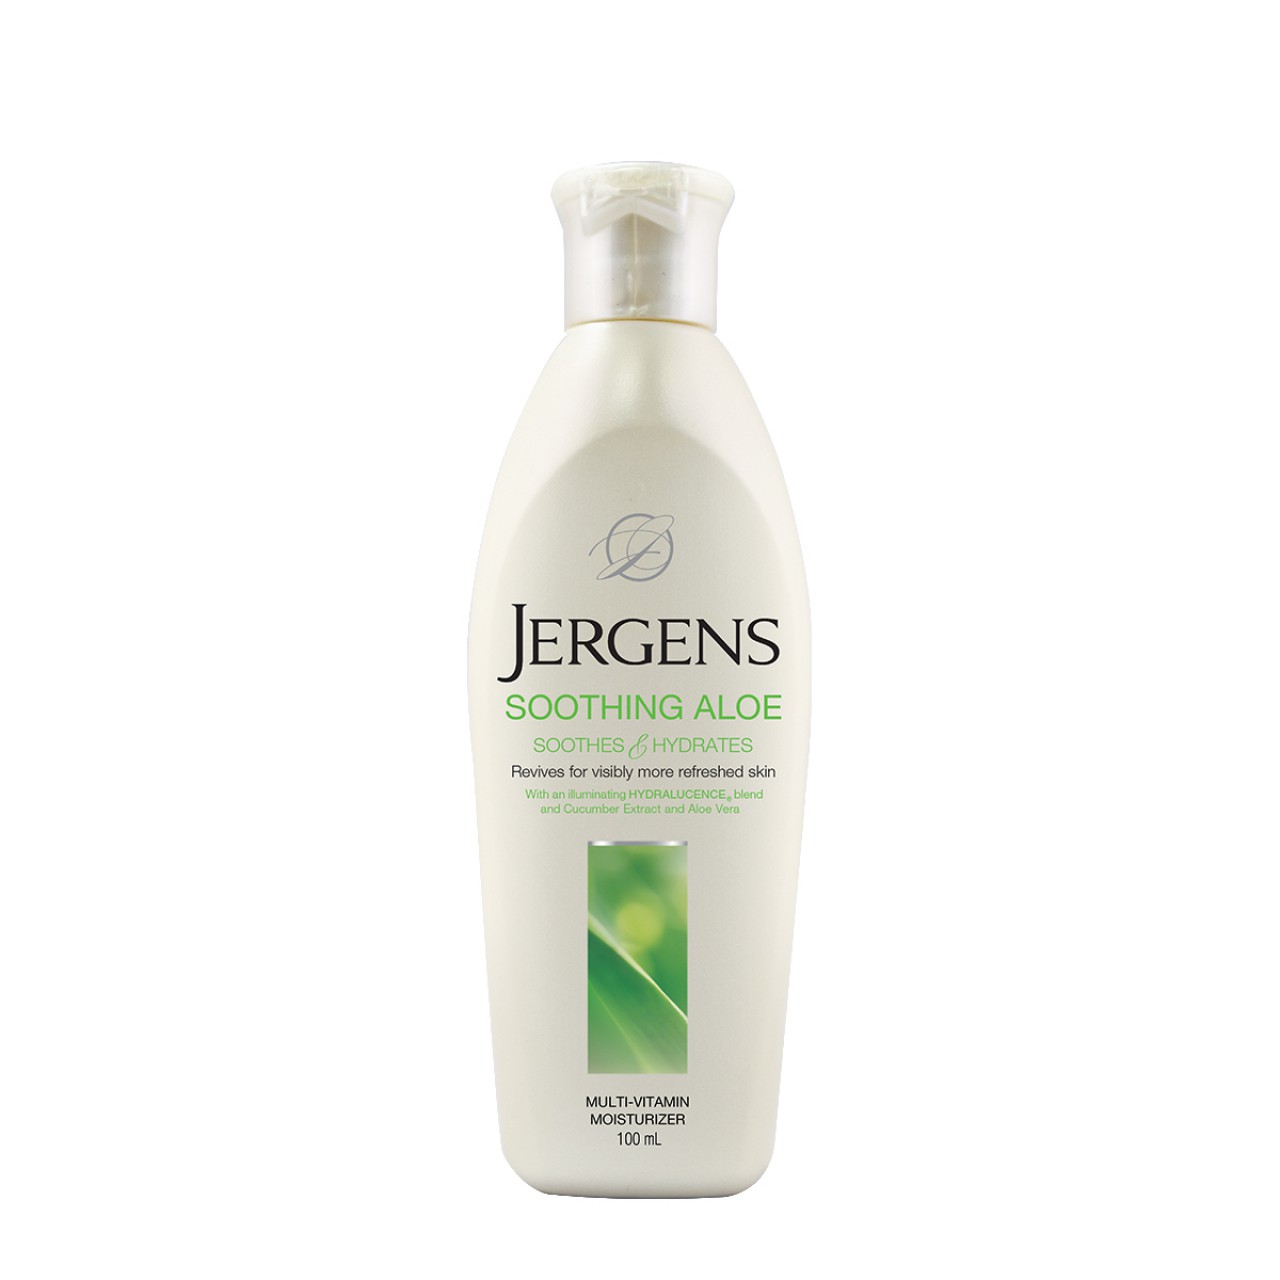 JERGENS MULTIVITAMIN MOISTURIZER LOTION (SOOTHES & HYDRATES) SOOTHIING ALOE 100ML